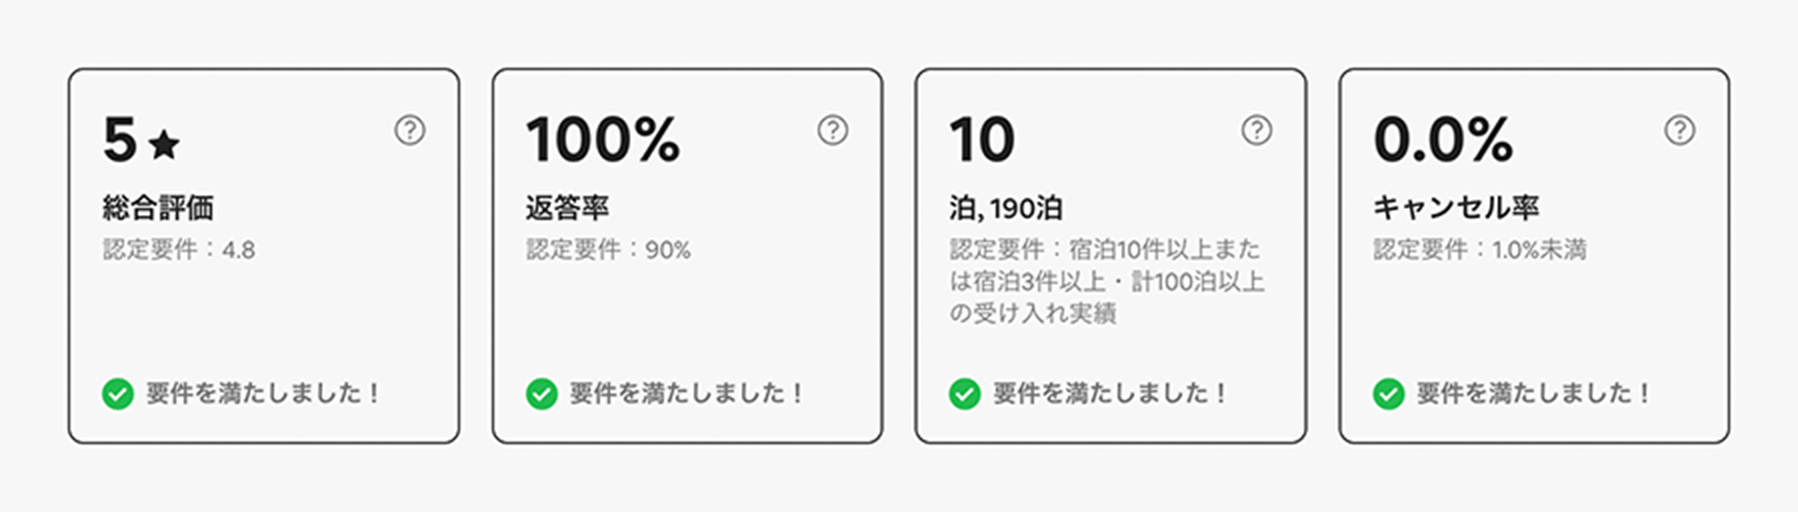 airbnbの評価